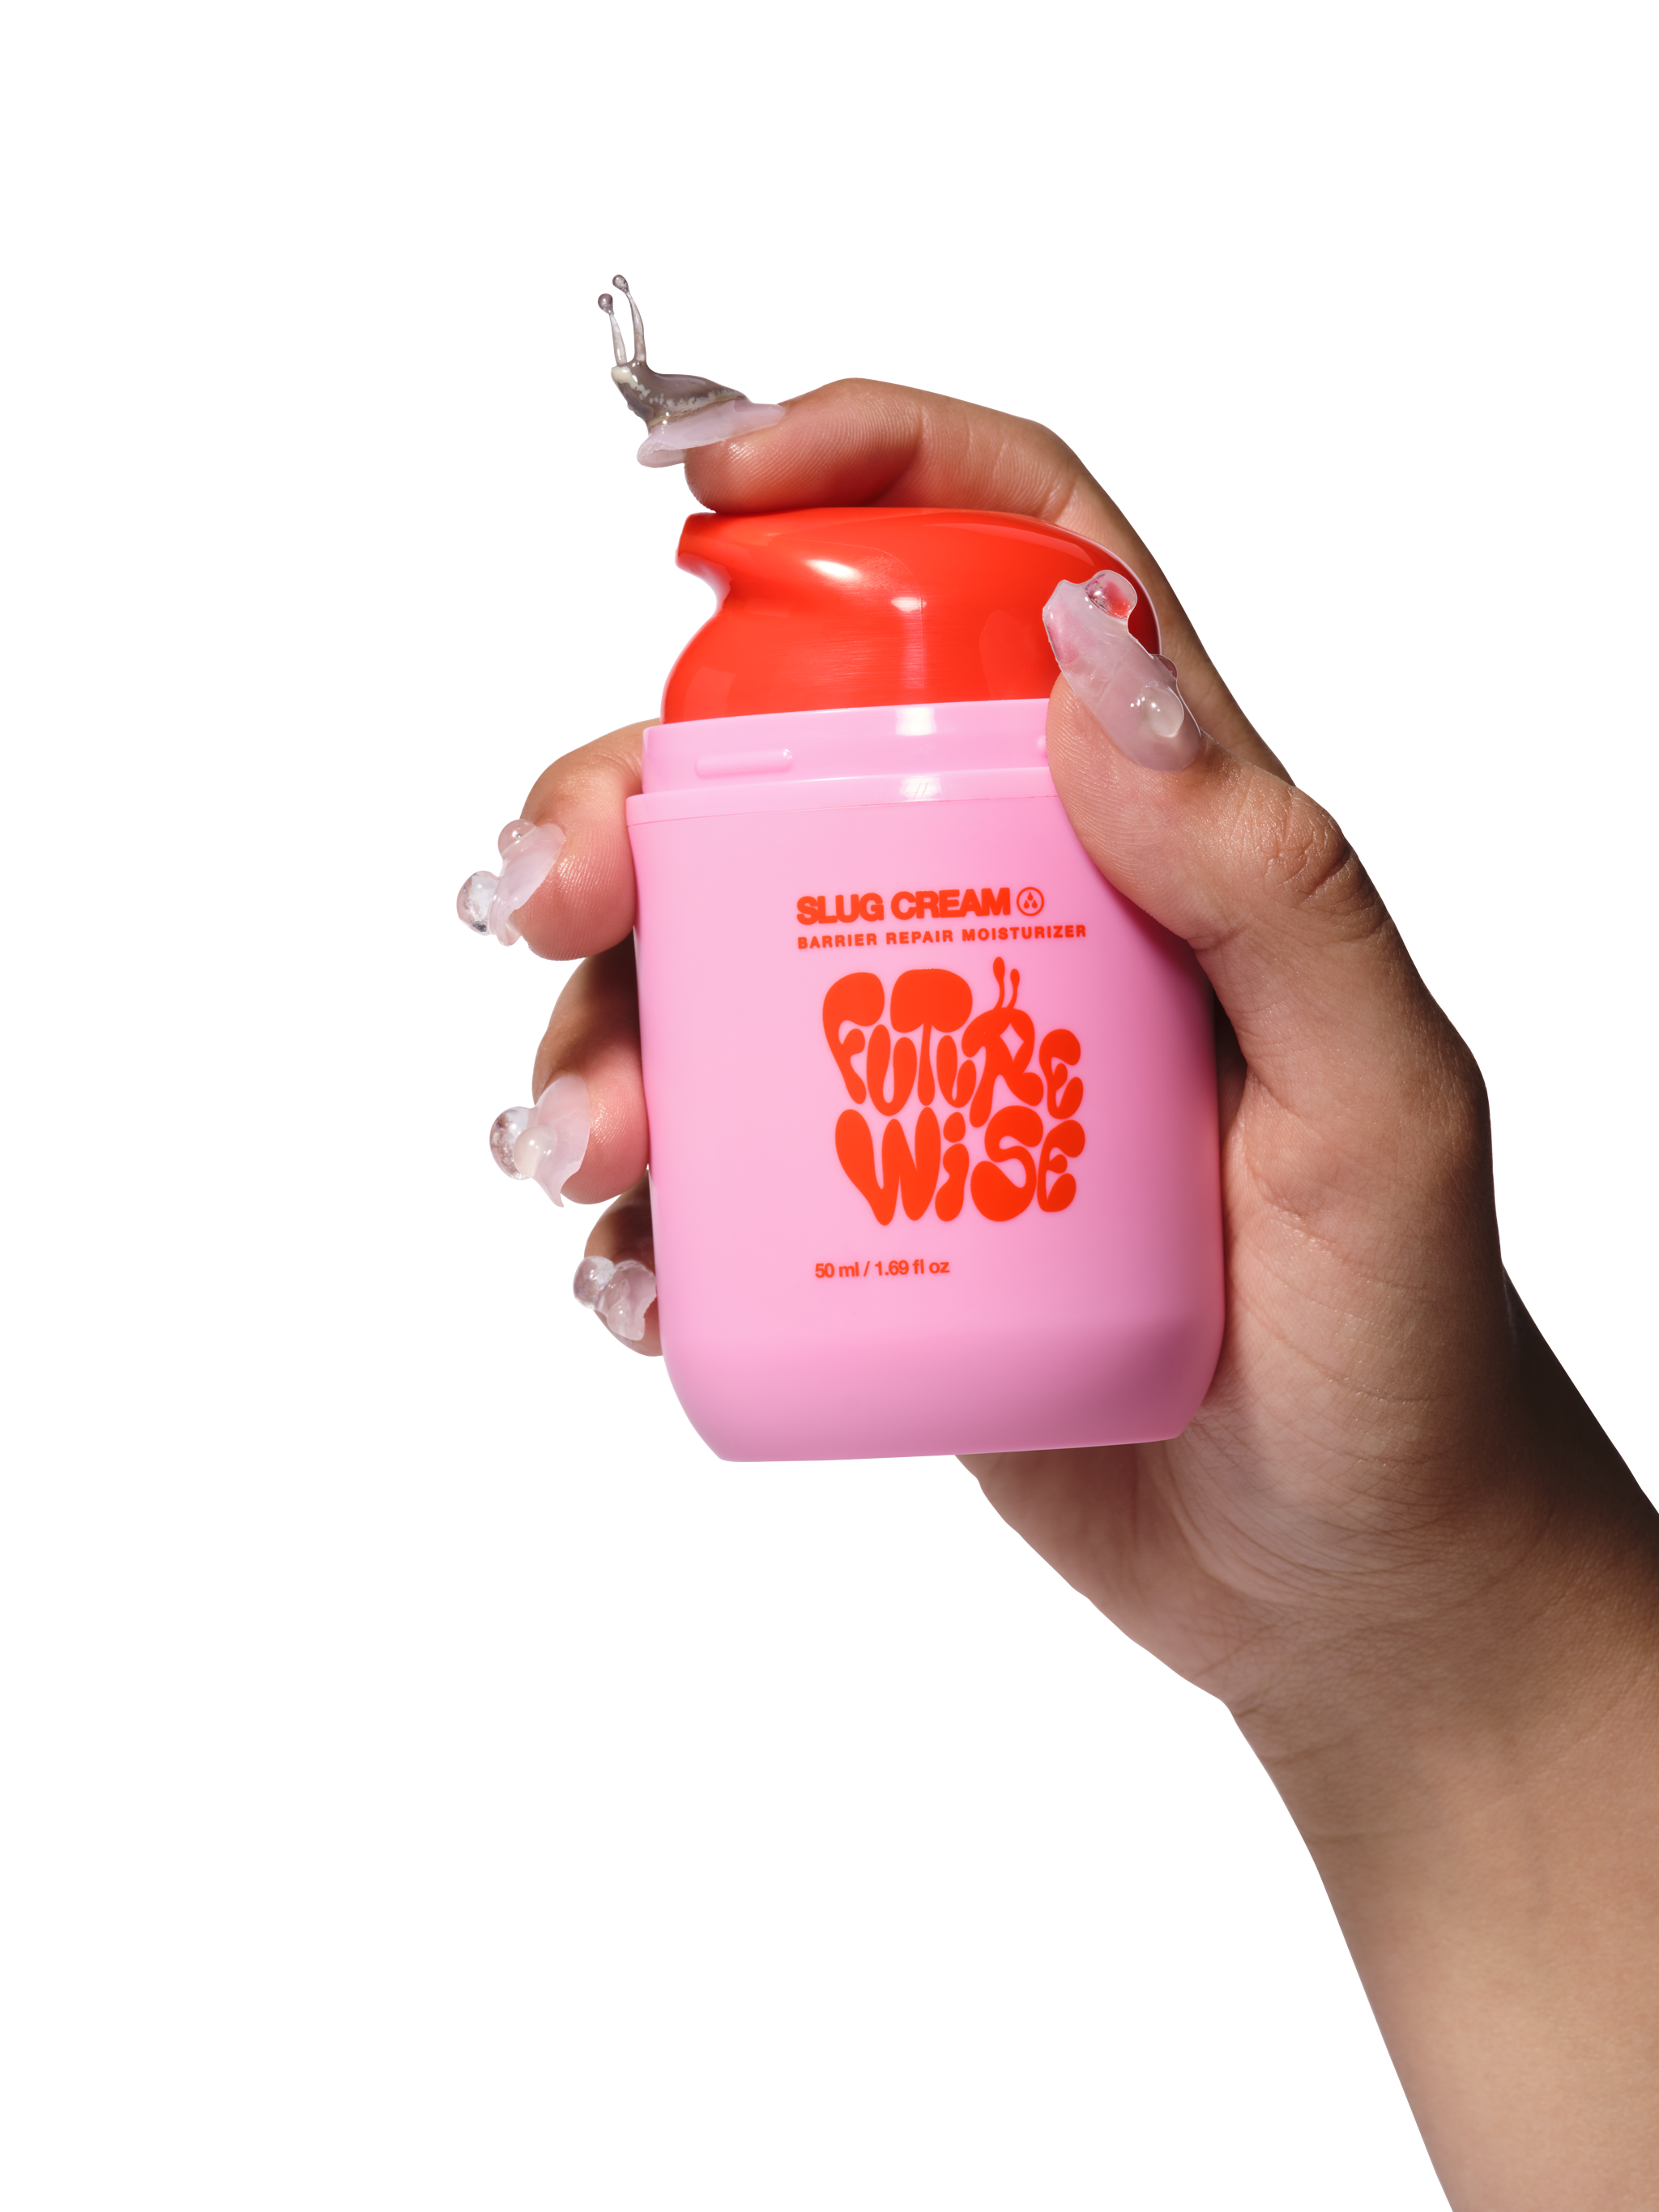 An outstretched hand holds the Slug Cream pink and red container